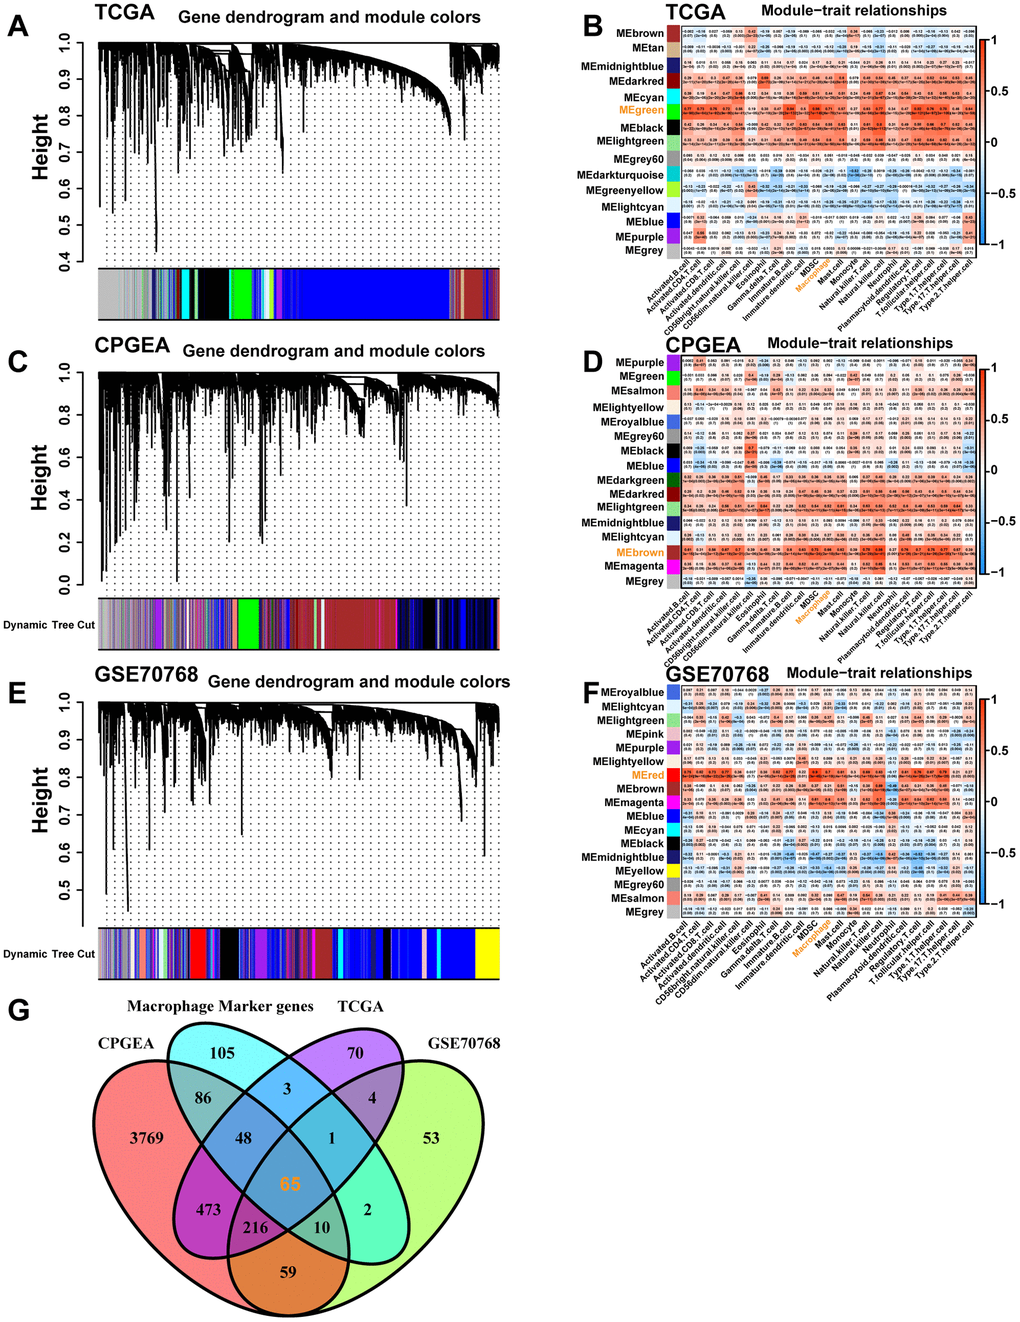 The co-expression network and heatmap illustrating the association between module eigengenes and macrophages were constructed through WGCNA based on the bulk RNA-seq data from the TCGA-PRAD database (A, B), the CPGEA dataset (C, D), and the GSE70768 database (E, F), respectively. (G) The Venn diagram displays the intersection of genes between macrophage-related genes selected from the above different datasets and macrophage marker genes from the scRNA-seq data.